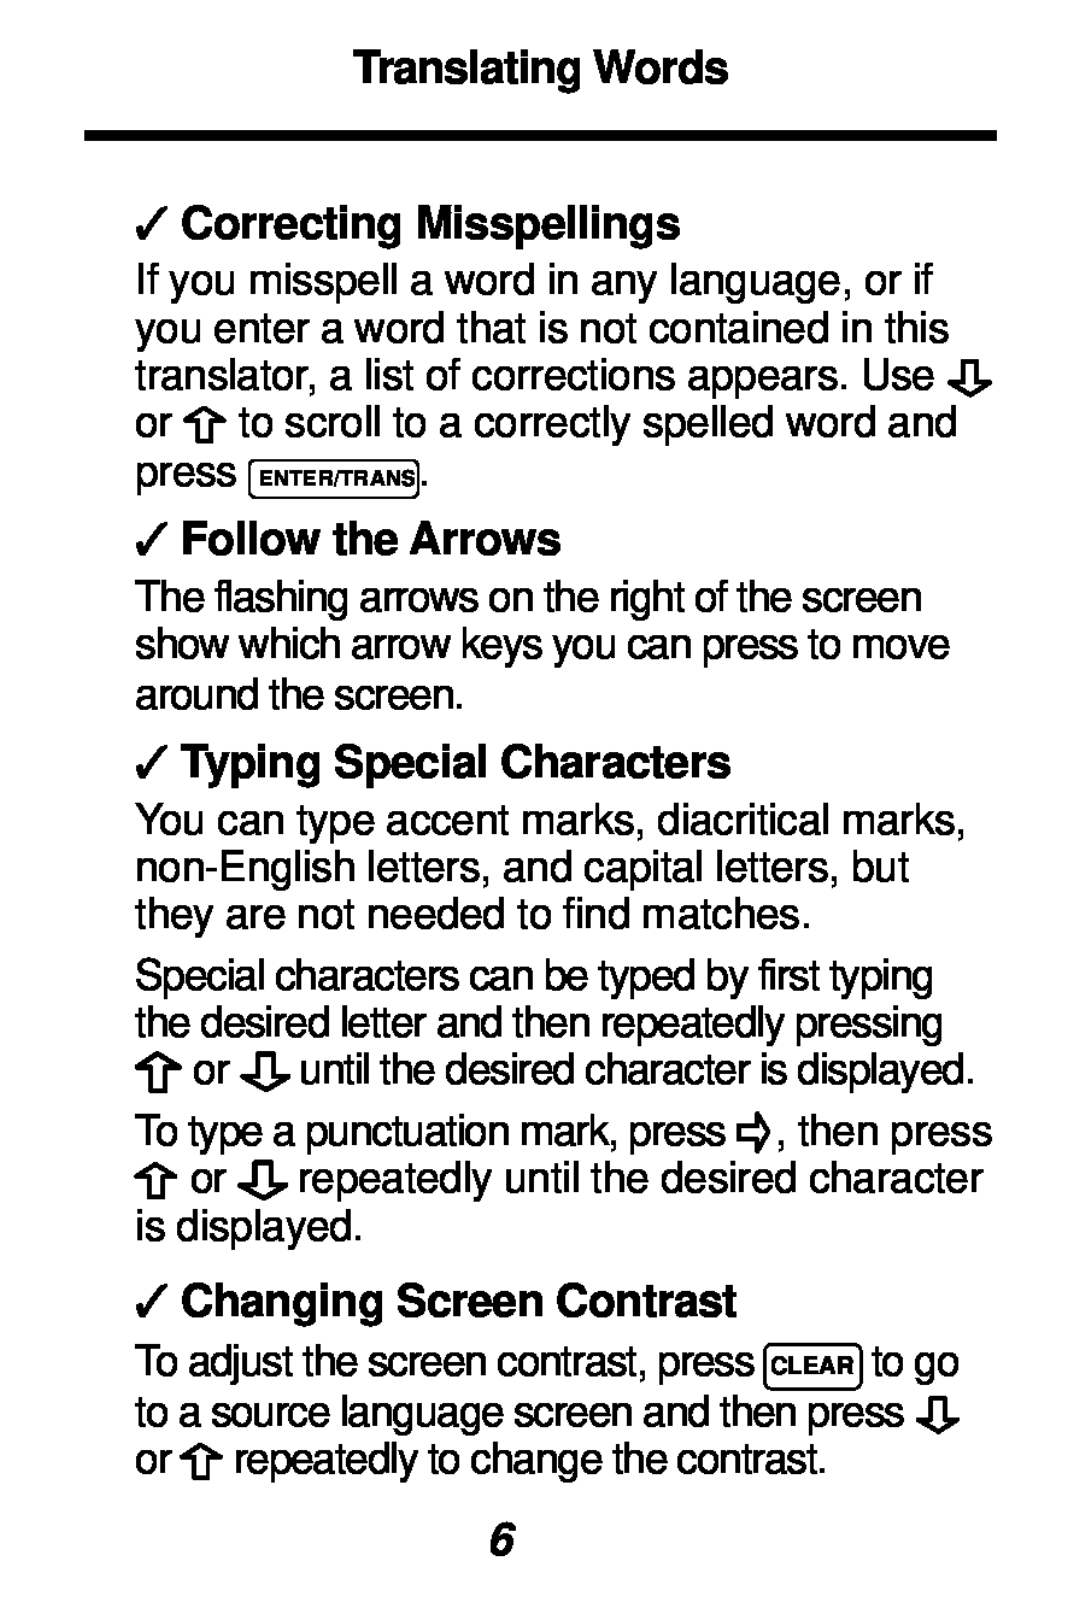 Franklin TES-106 manual Translating Words, Correcting Misspellings, Follow the Arrows, Typing Special Characters 